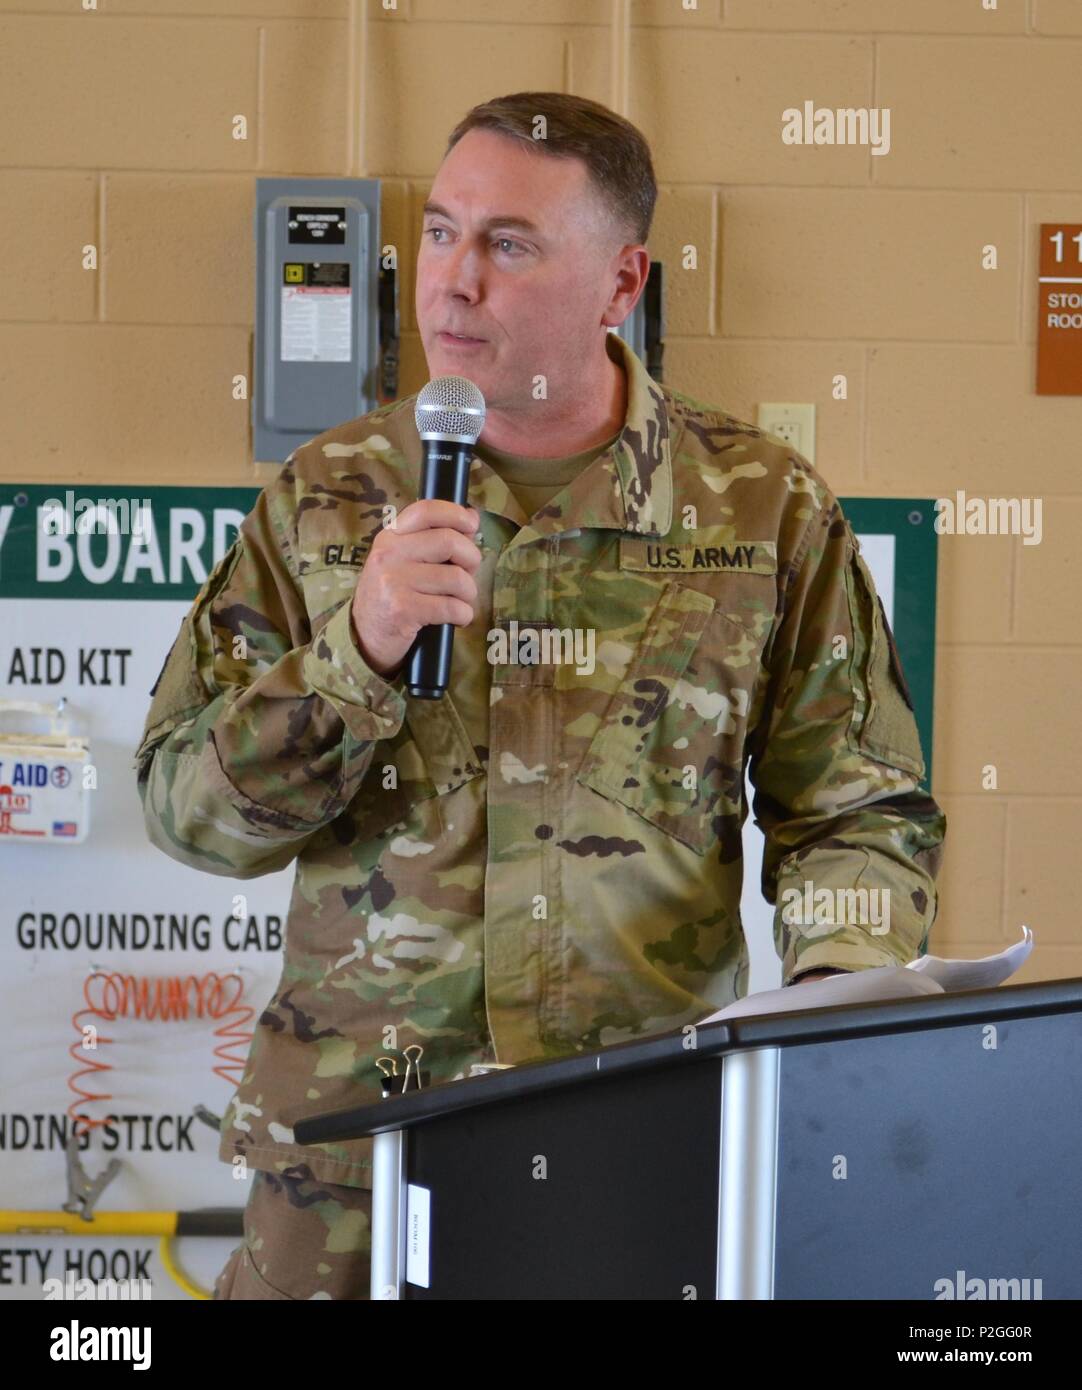 Lt. Col. Peter F. Gleason, a Tracy, California resident and 63rd Brigade Support Battalion incoming commander, addresses Soldiers of his new command, during a change of command ceremony at the George W. Dunaway Army Reserve Center in Sloan, Nev. September 10. He began his 31-year Army Reserve career as an Adjutant General enlisted Soldier in 1984 and in 1995 he attended Officer Candidates School at Fort Benning, Ga., and was commissioned as a Quartermaster Officer. Stock Photo